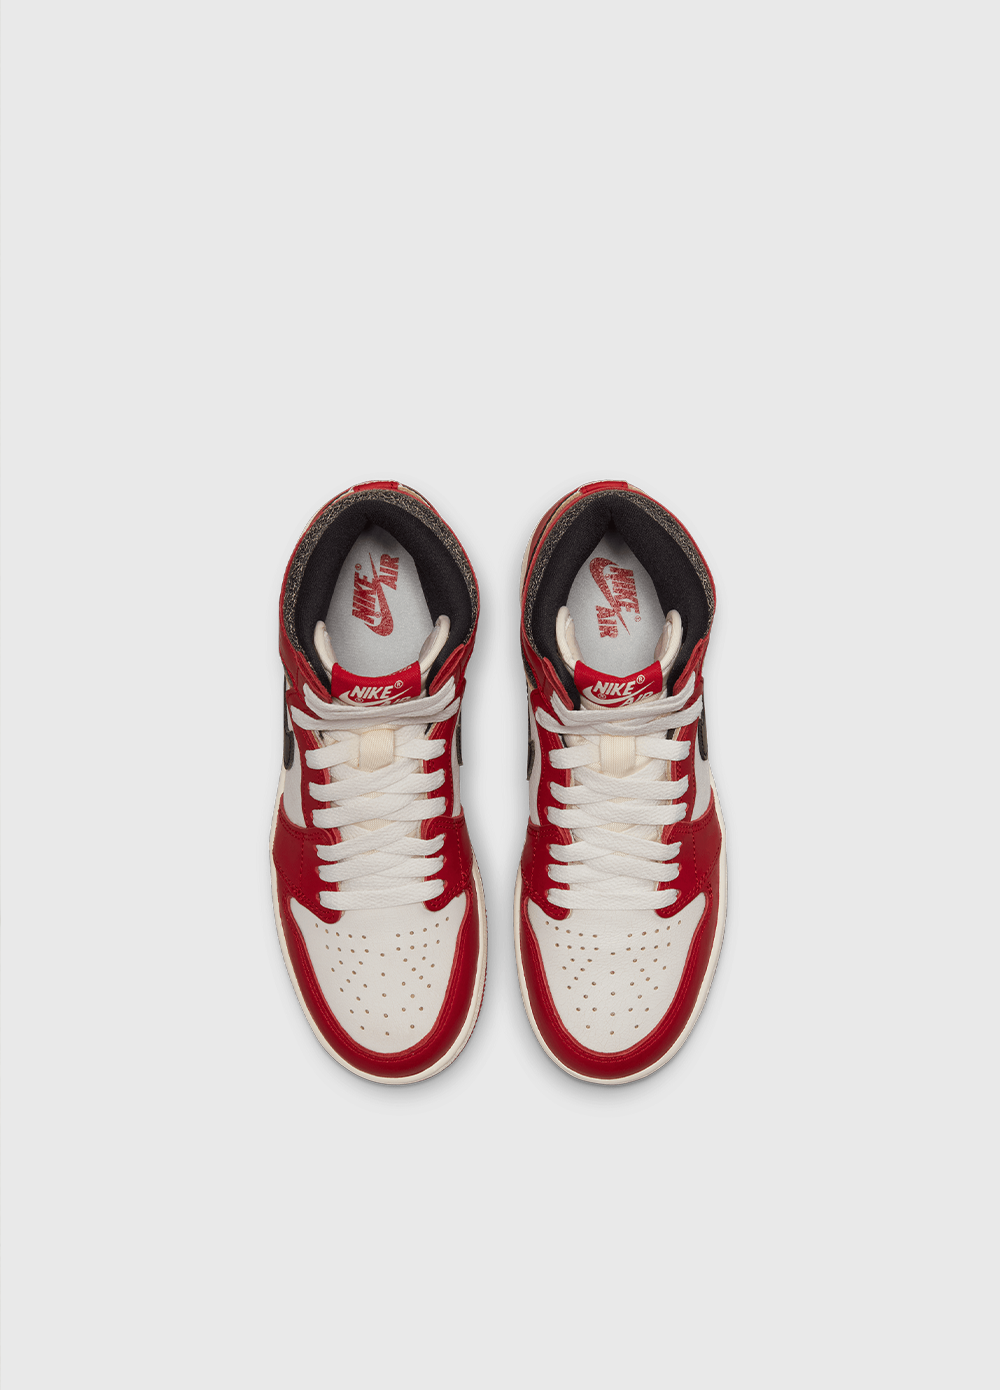 Youth Air Jordan 1 Retro High 'Chicago Lost & Found' Sneakers